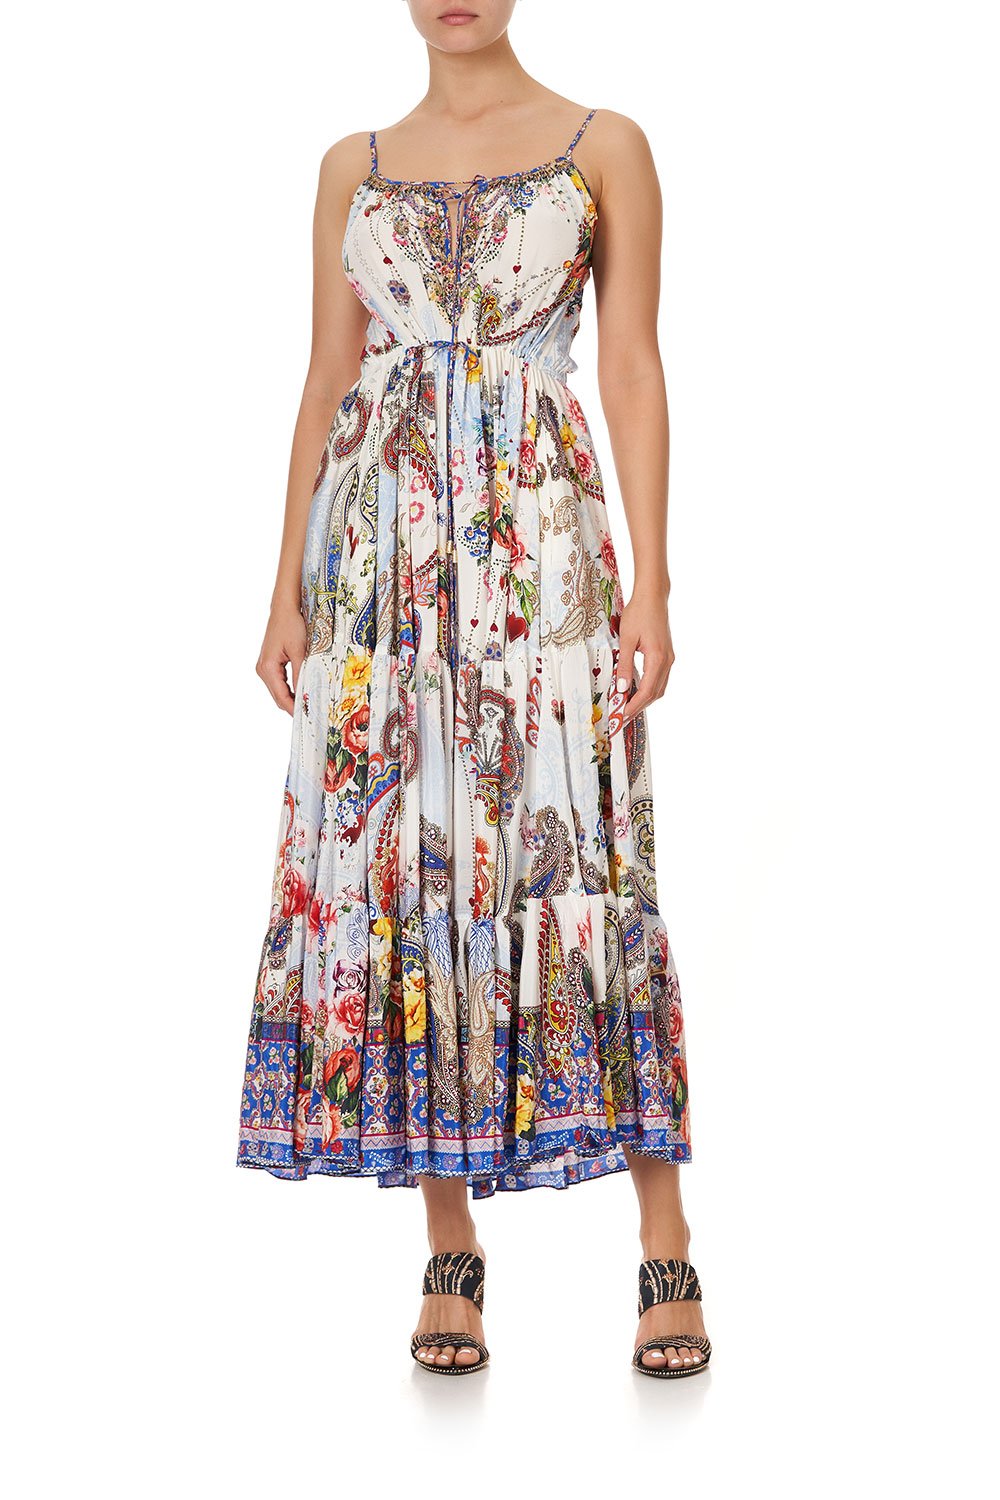 DRESS WITH FRONT TIE DETAIL FRIDA FREEDOM